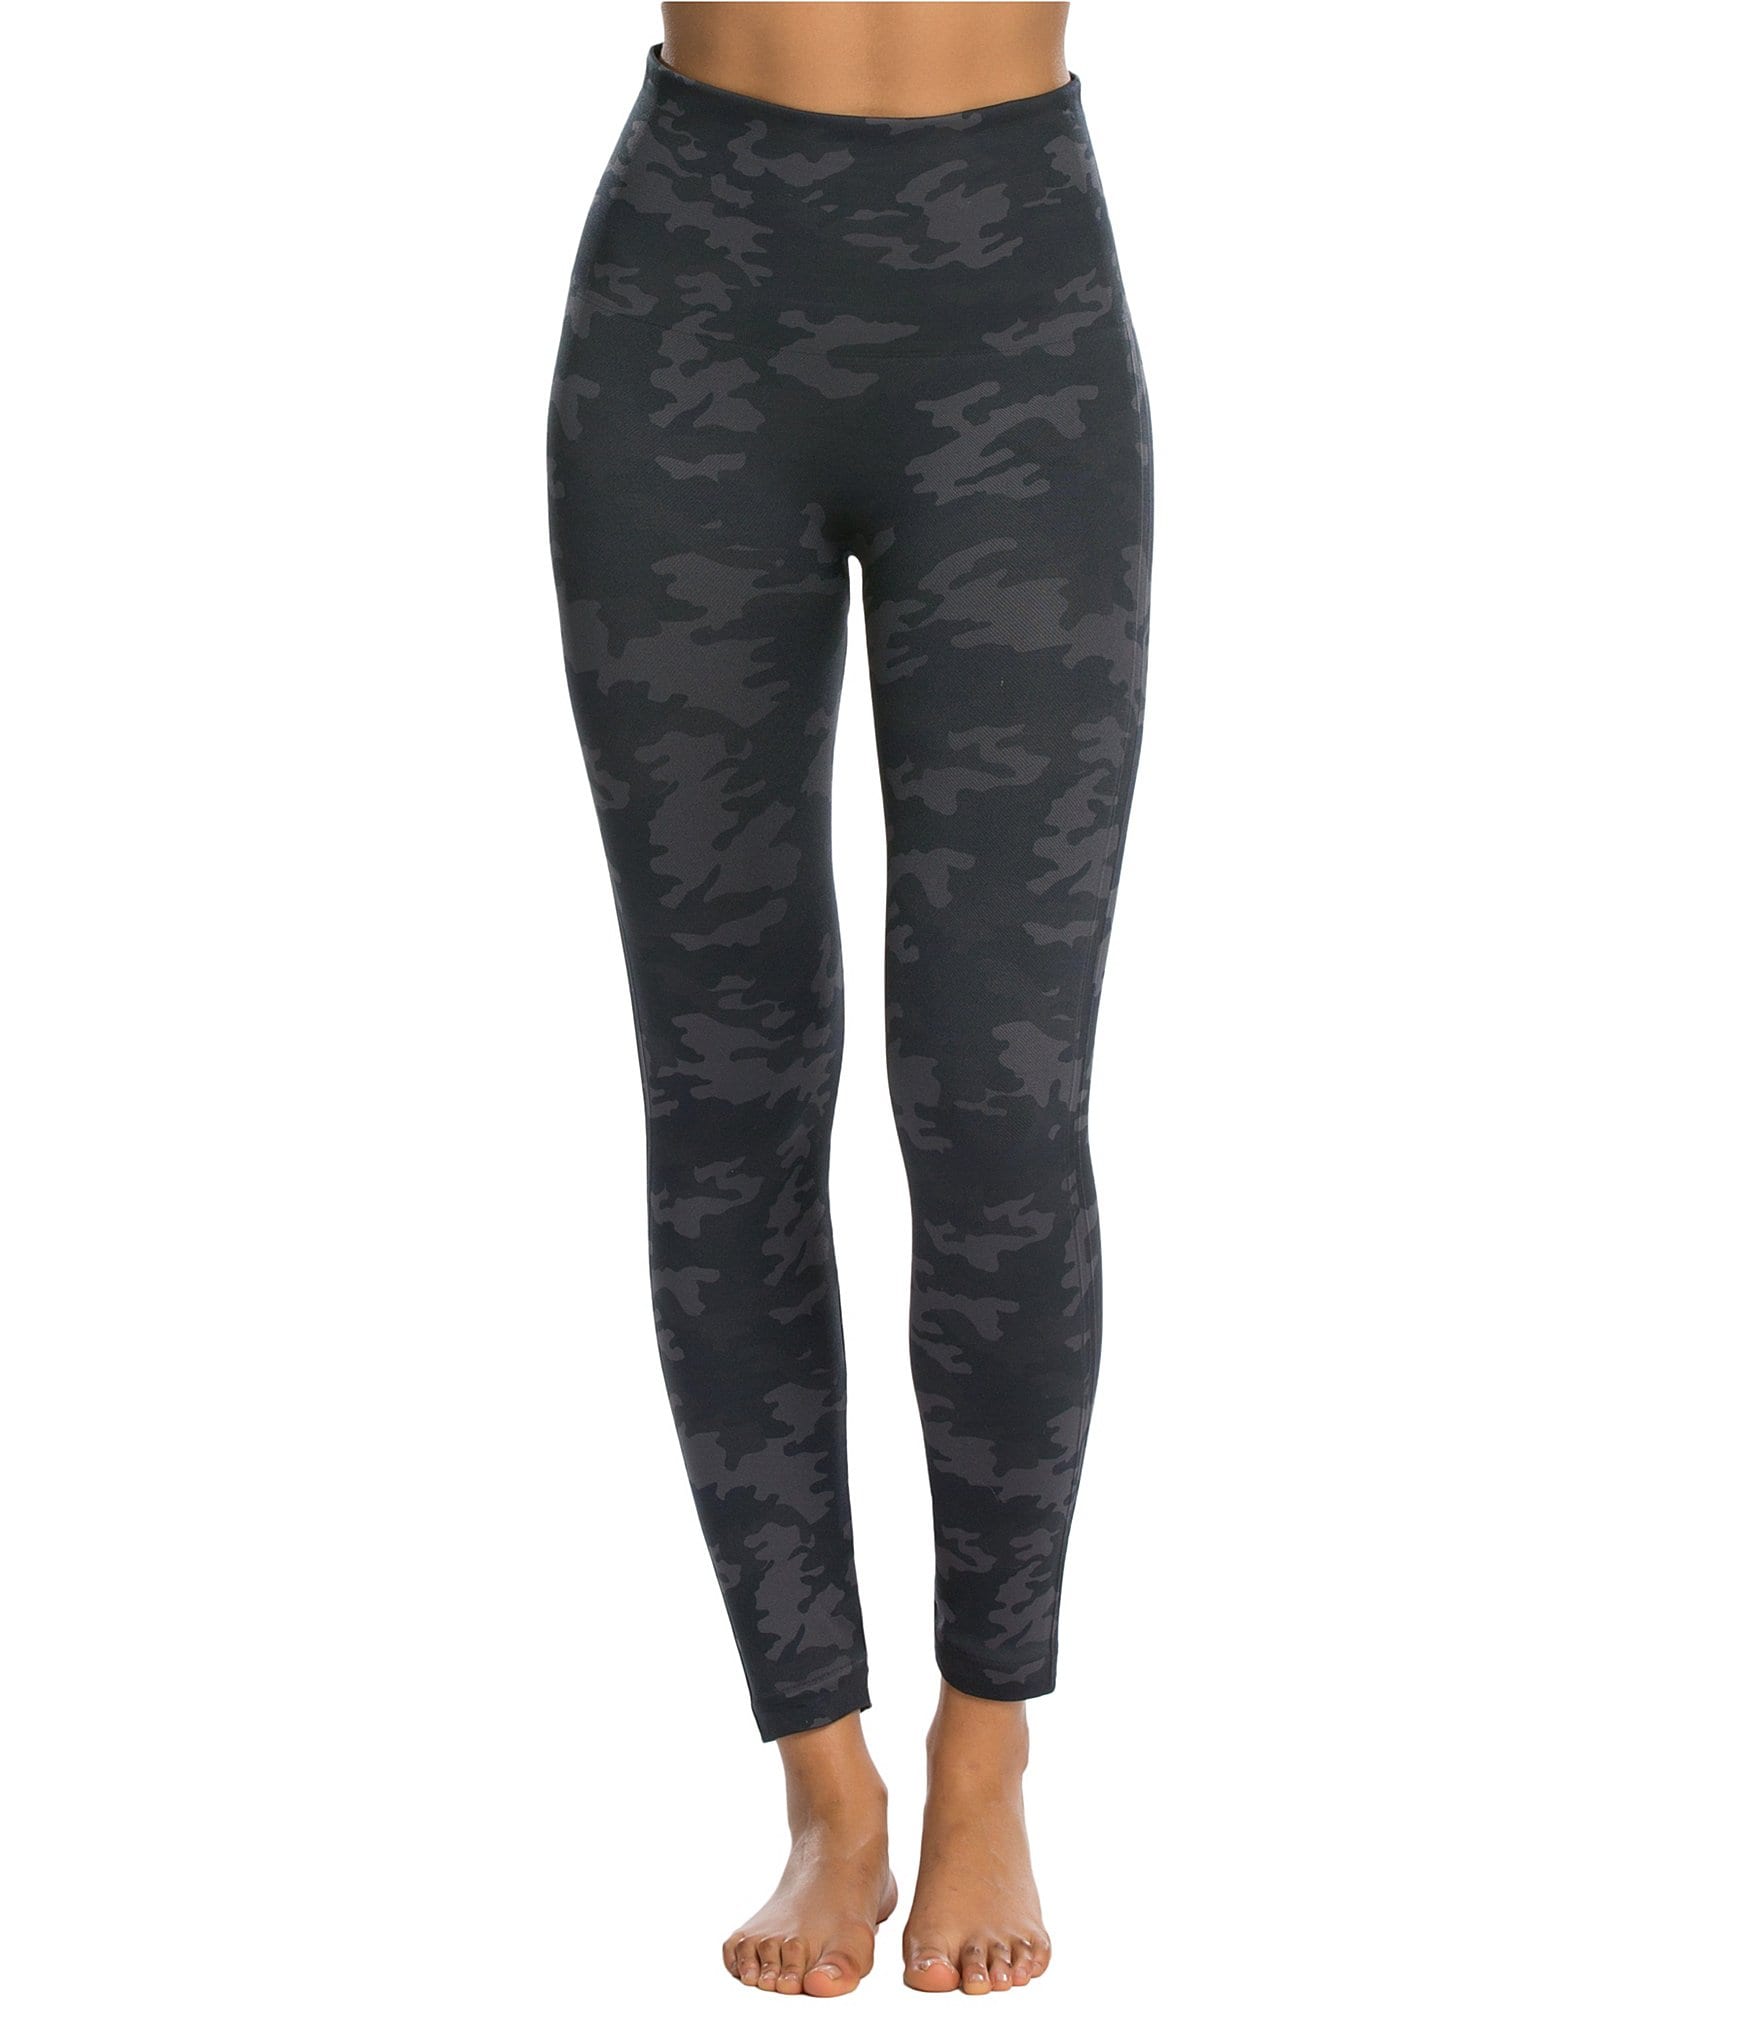 How to Style Spanx Camo Leggings - You'll Want To Wear Them Everywhere! —  Crazy Blonde Life